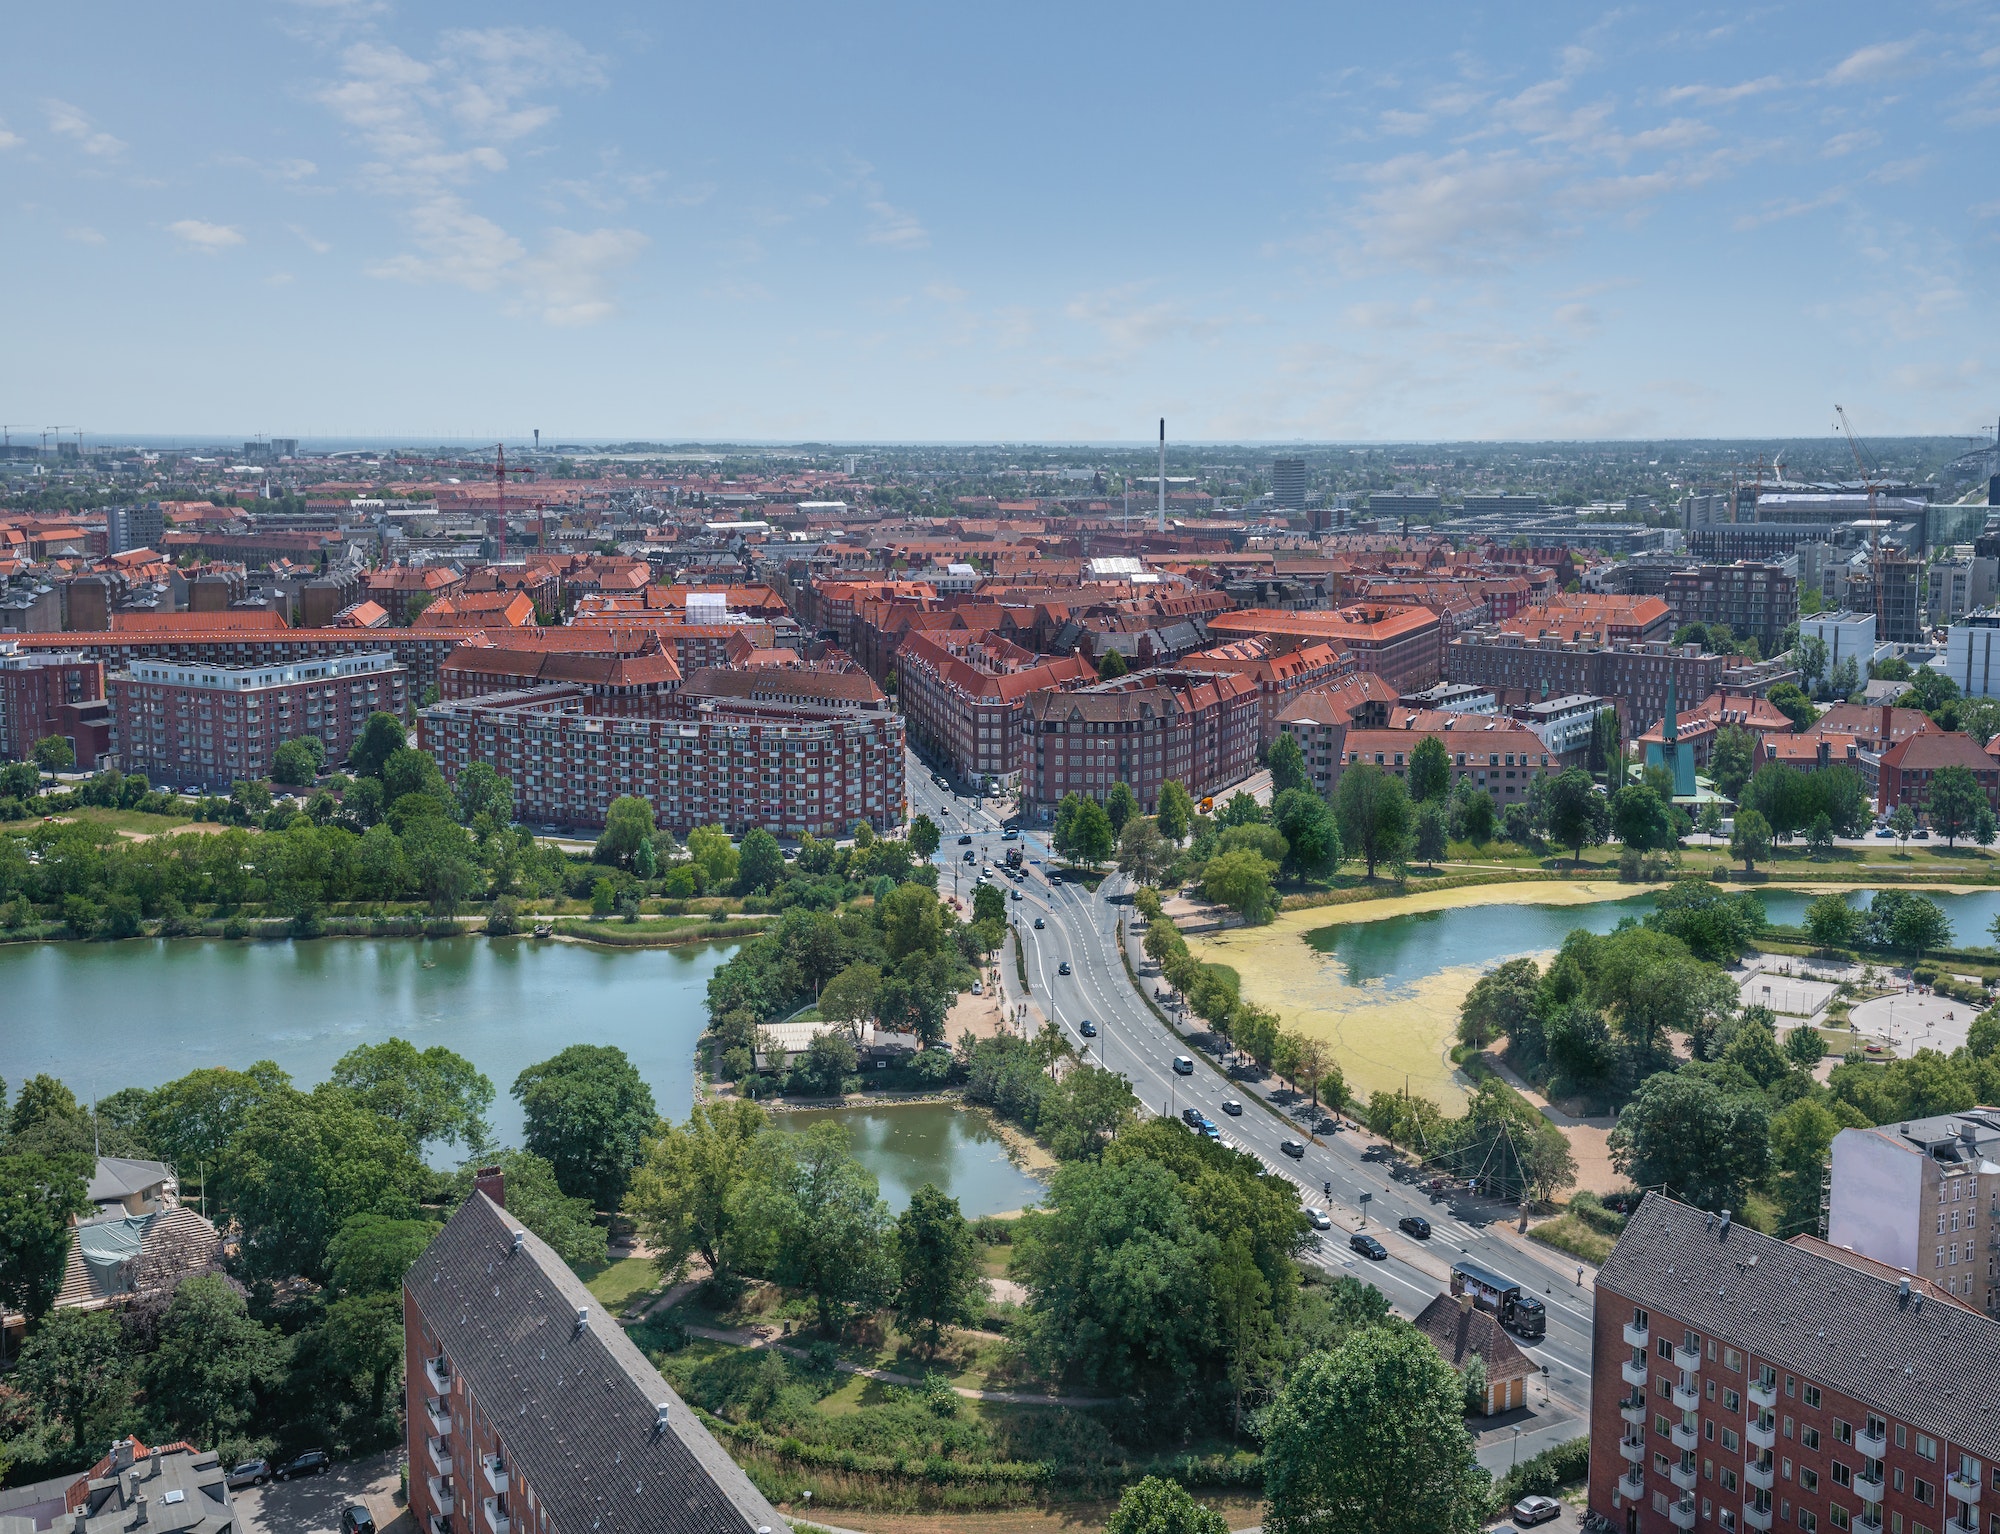 Aerial view of Stadsgraven Canal and Amager Island - Copenhagen, Denmark